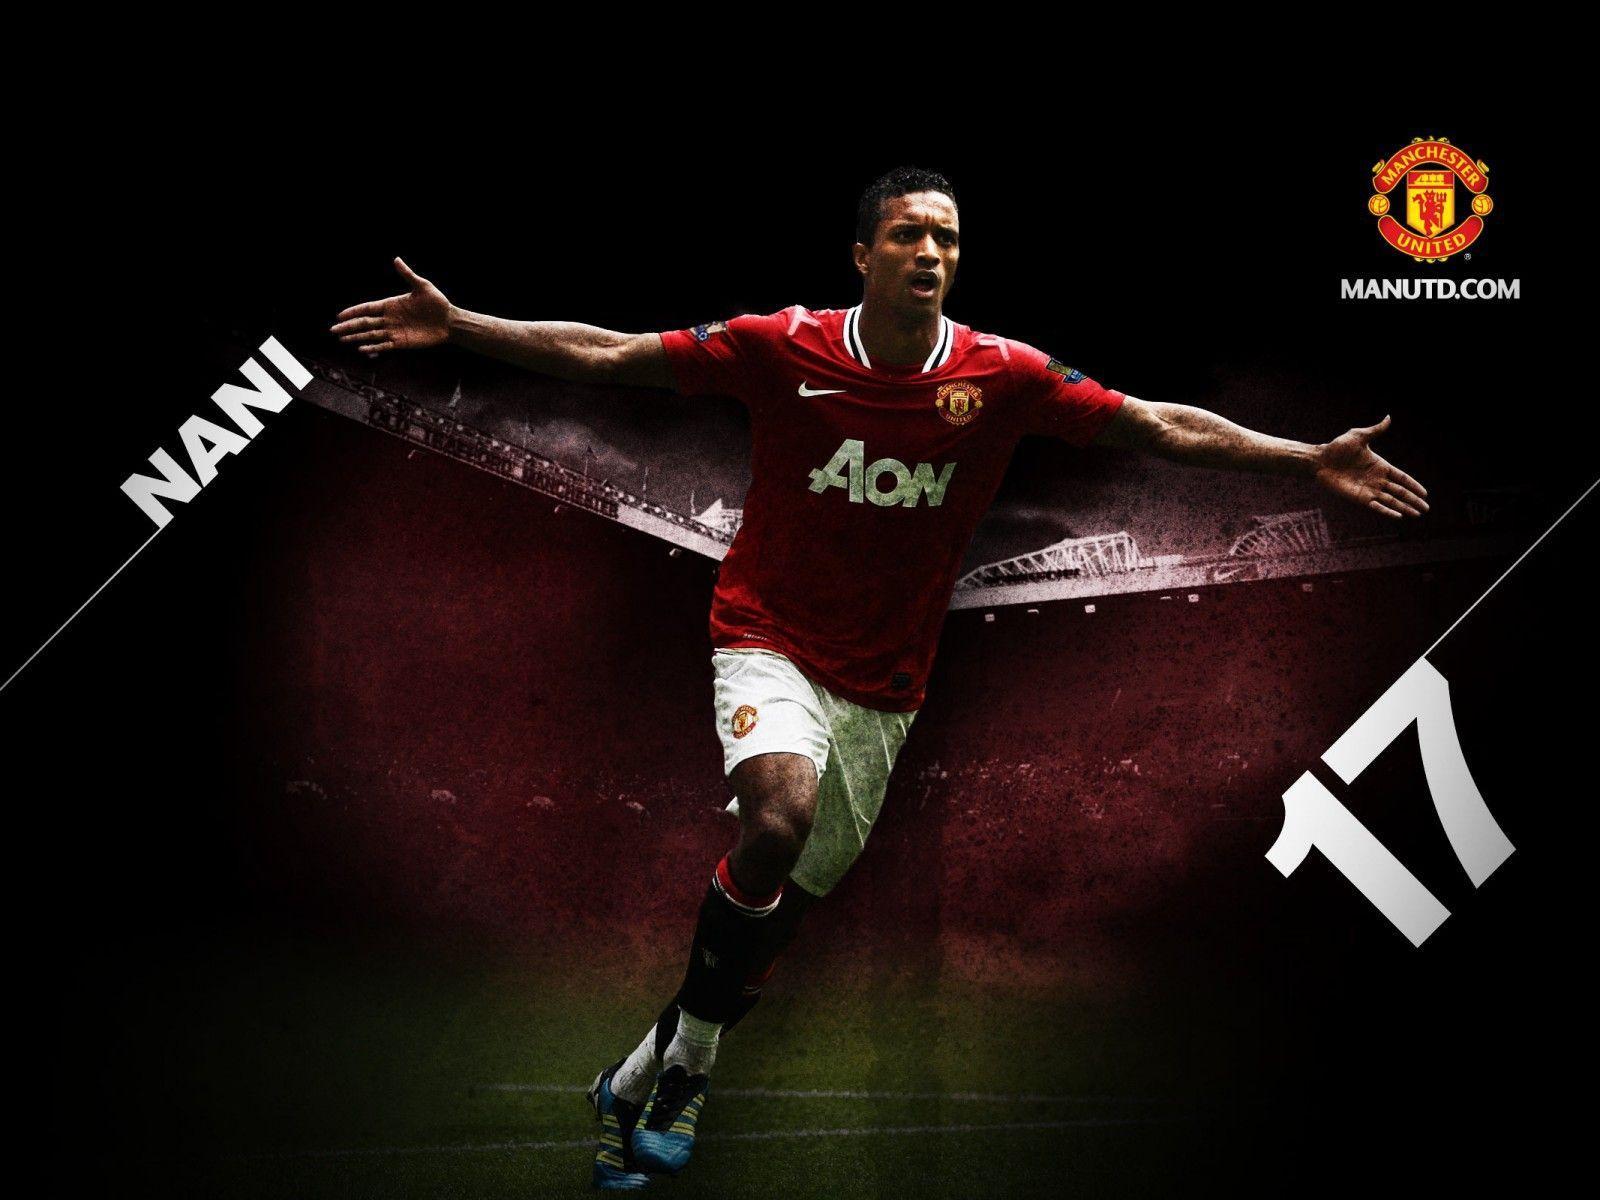 The halfback of Manchester United Luis Nani after goal wallpaper